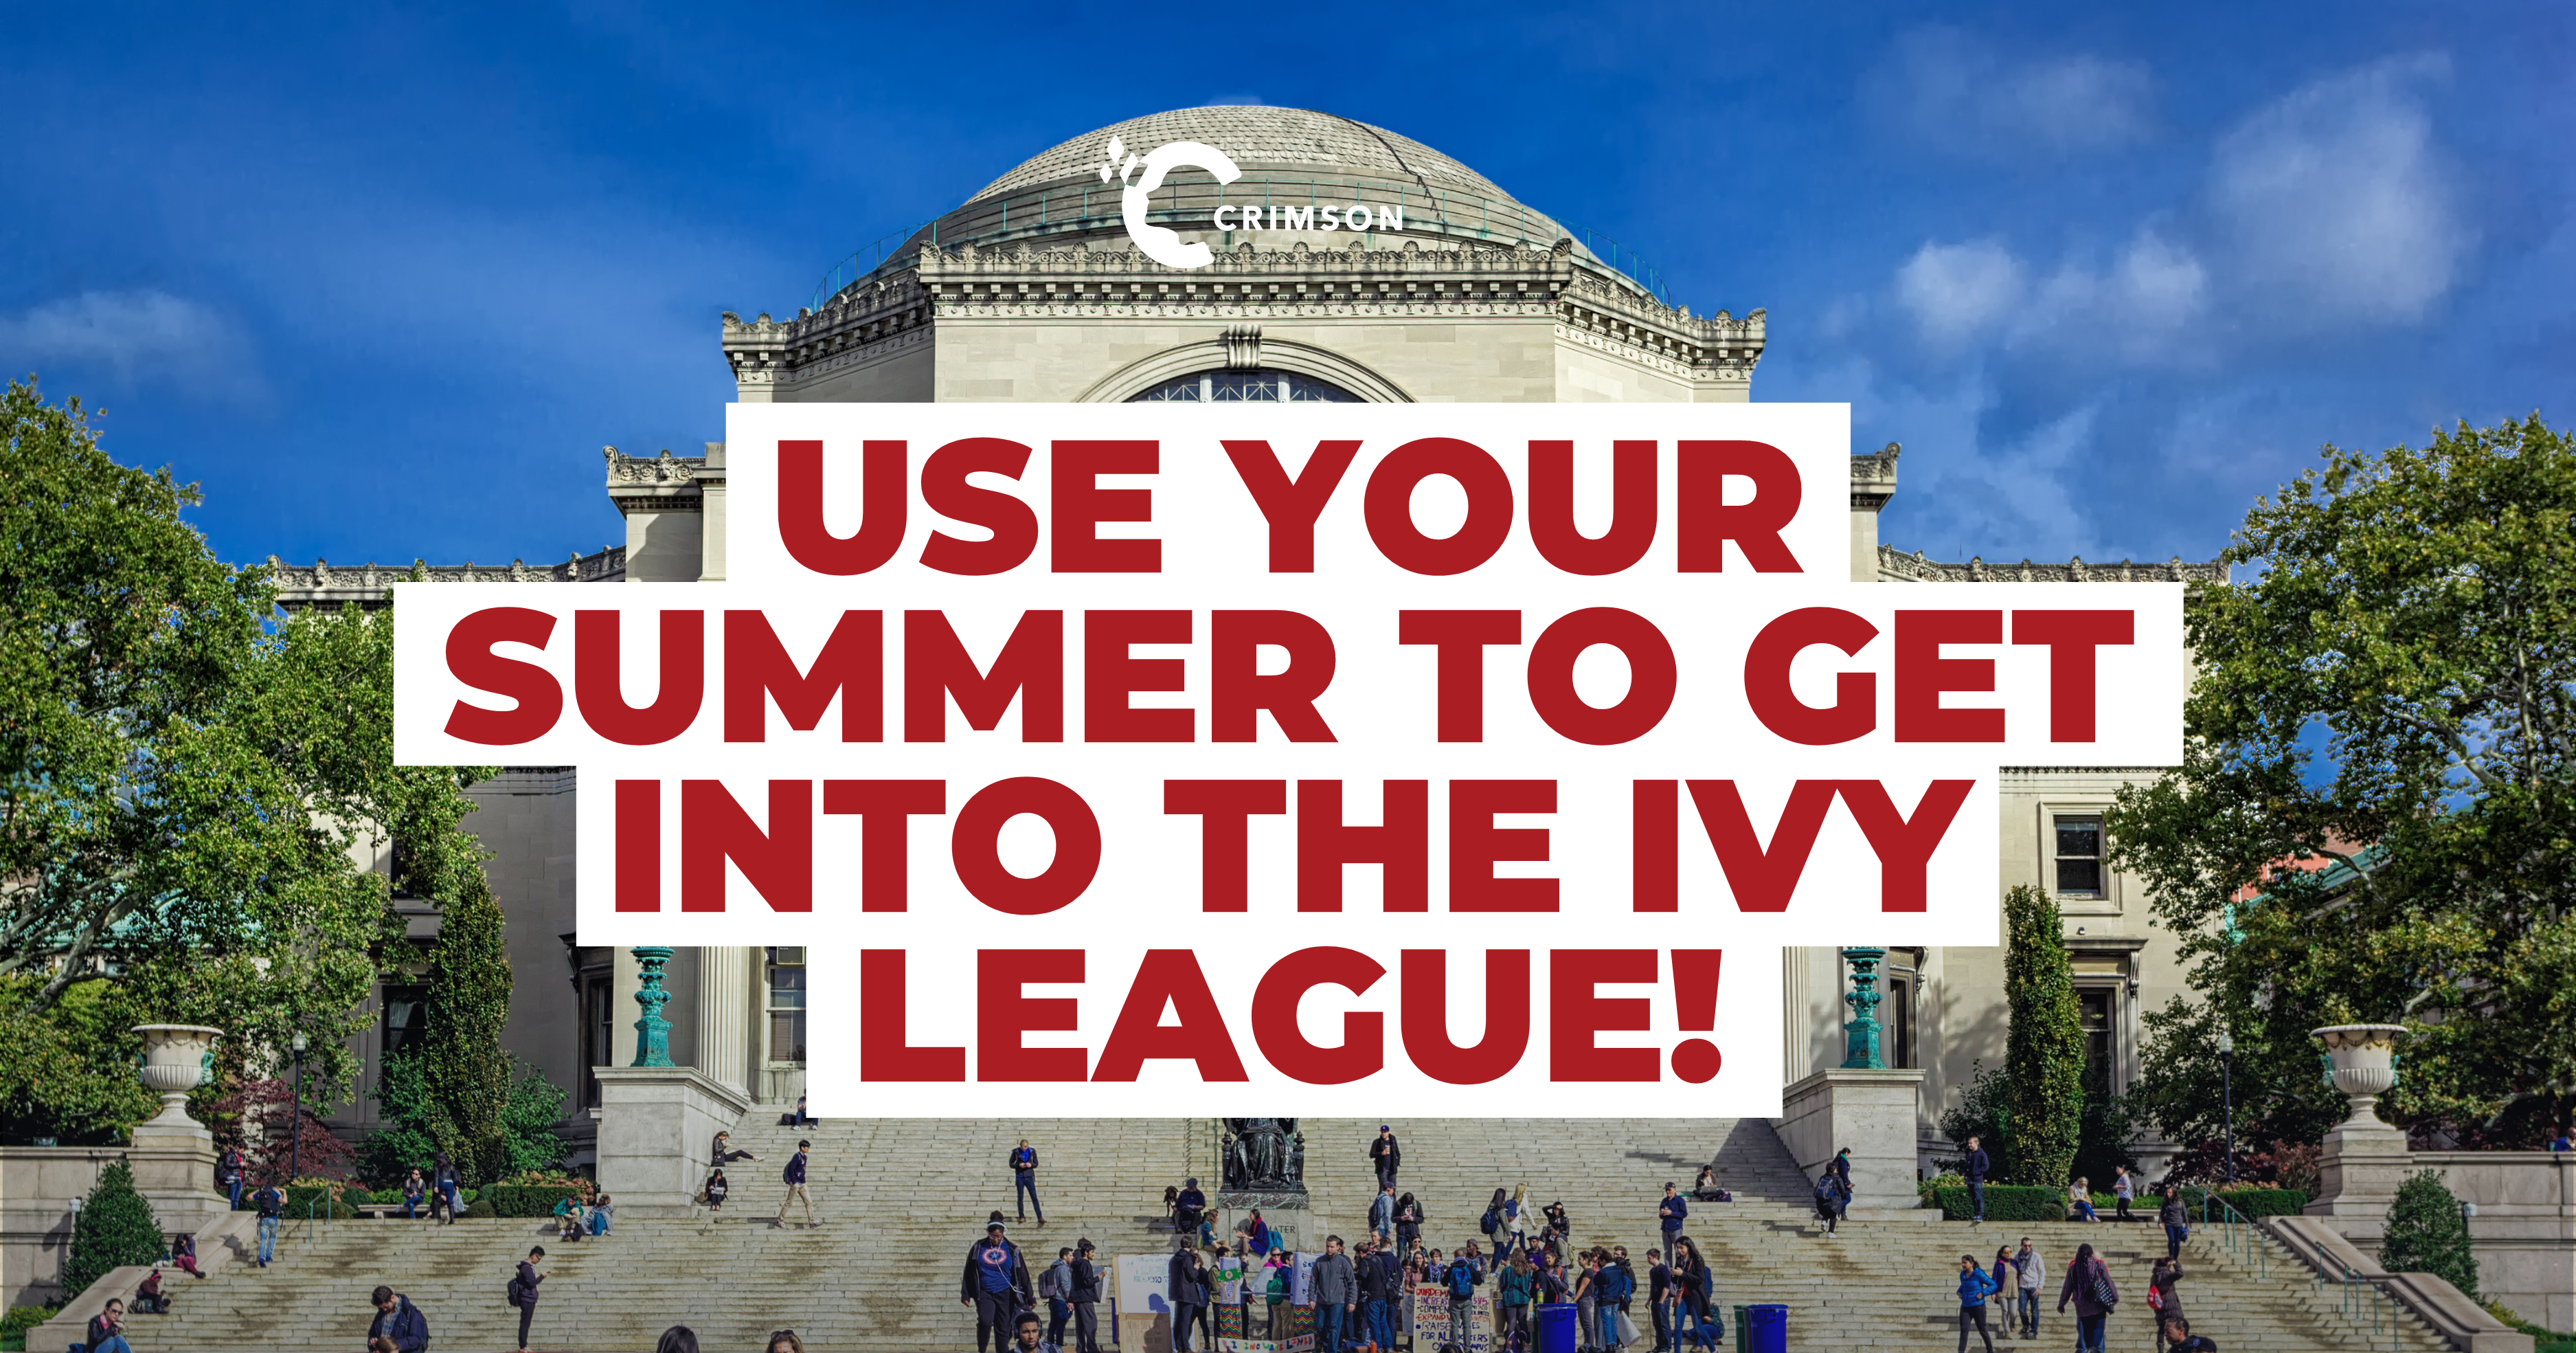 Use your summer to get into the ivy league